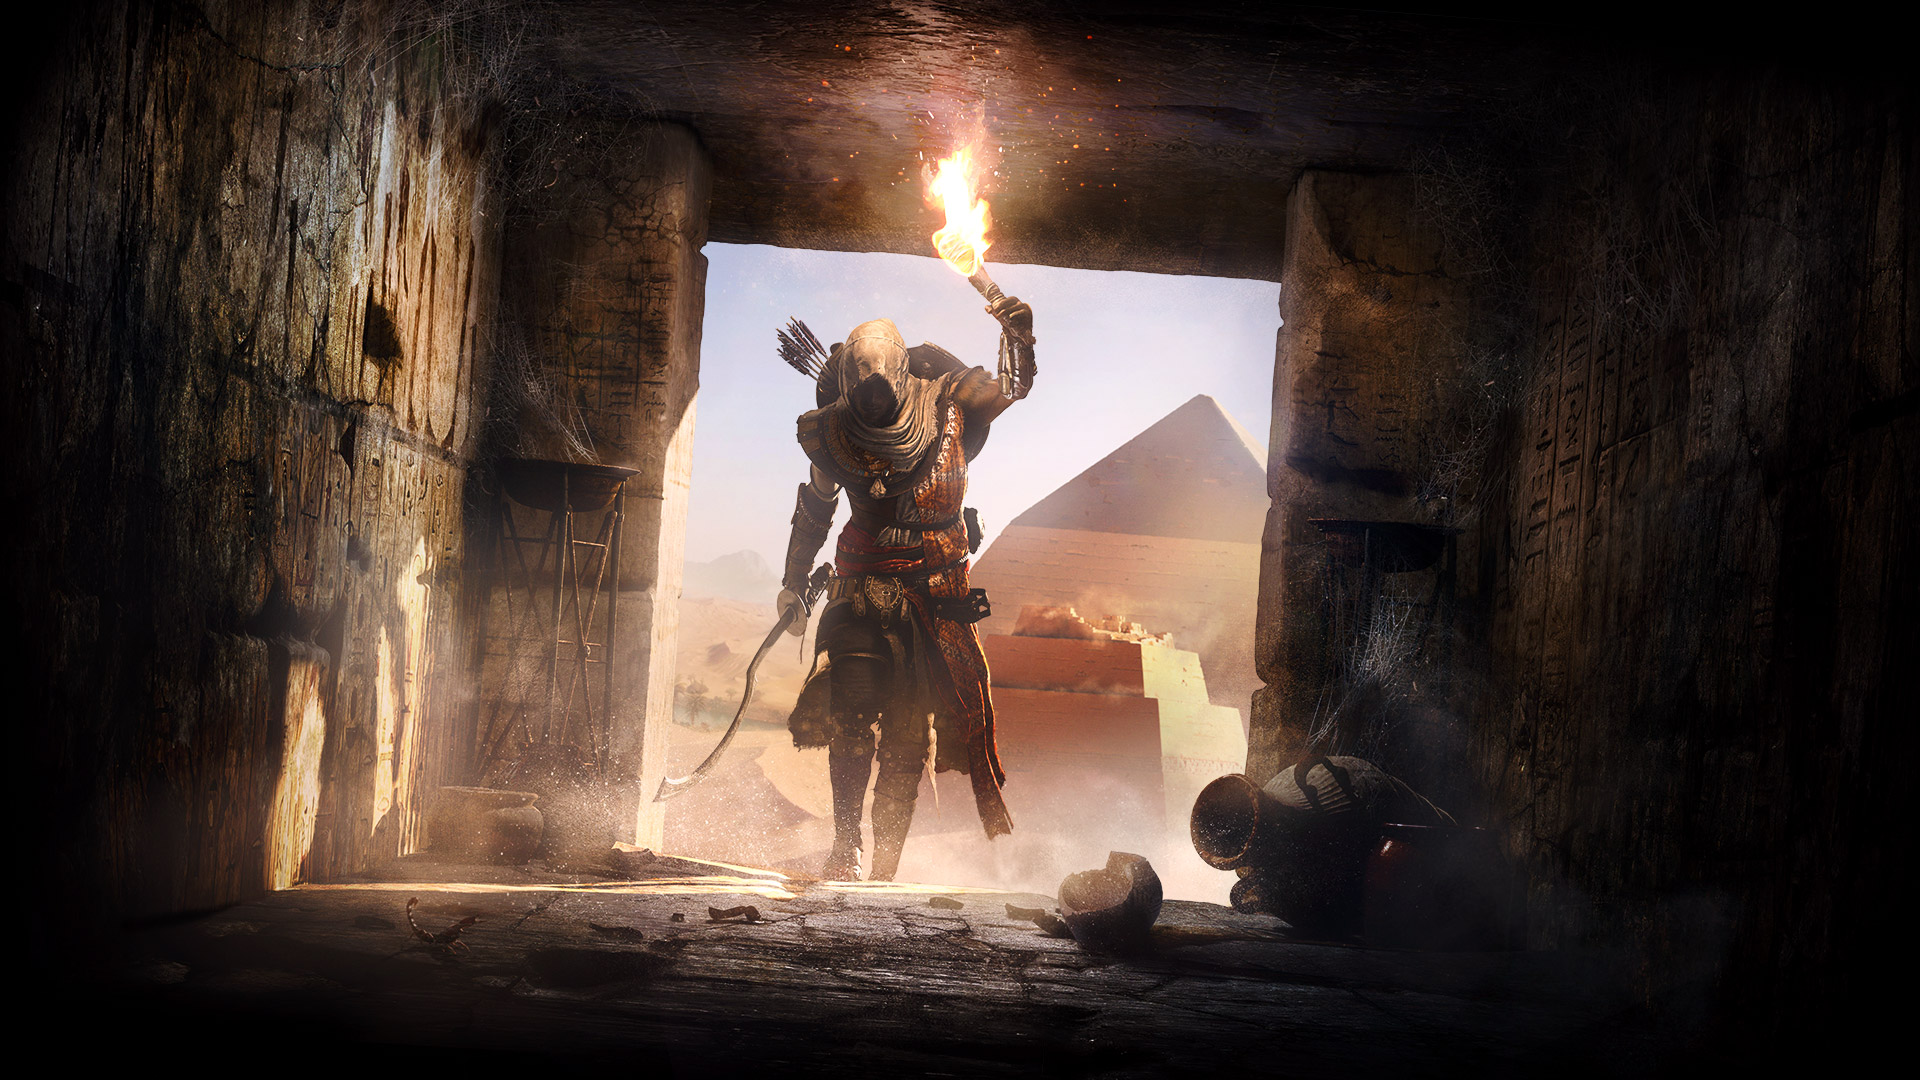 Wallpaper Secrets of the first pyramids, Assassin's Creed Origins, video game